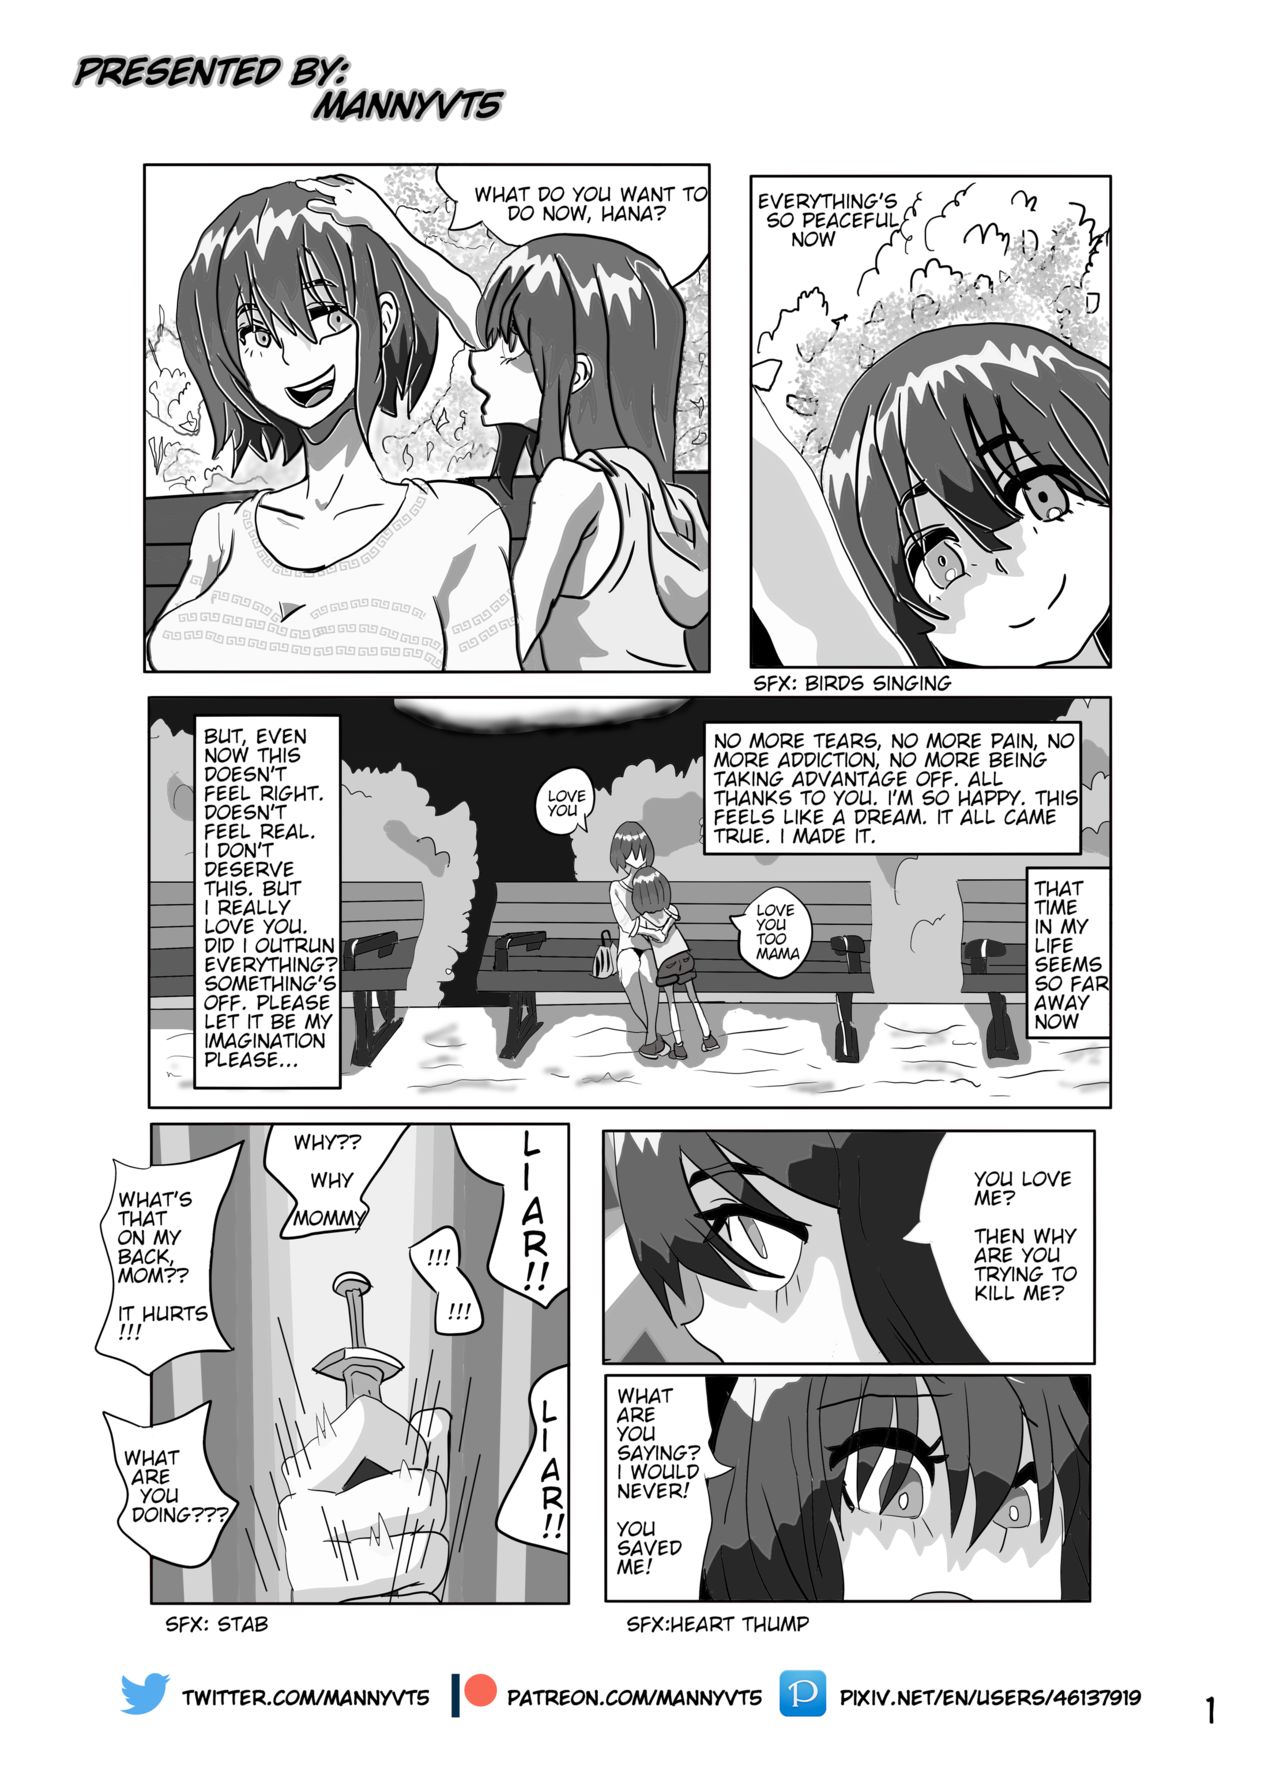 Emergence Metamorphosis chapter 8 - Page 1 - HentaiEra